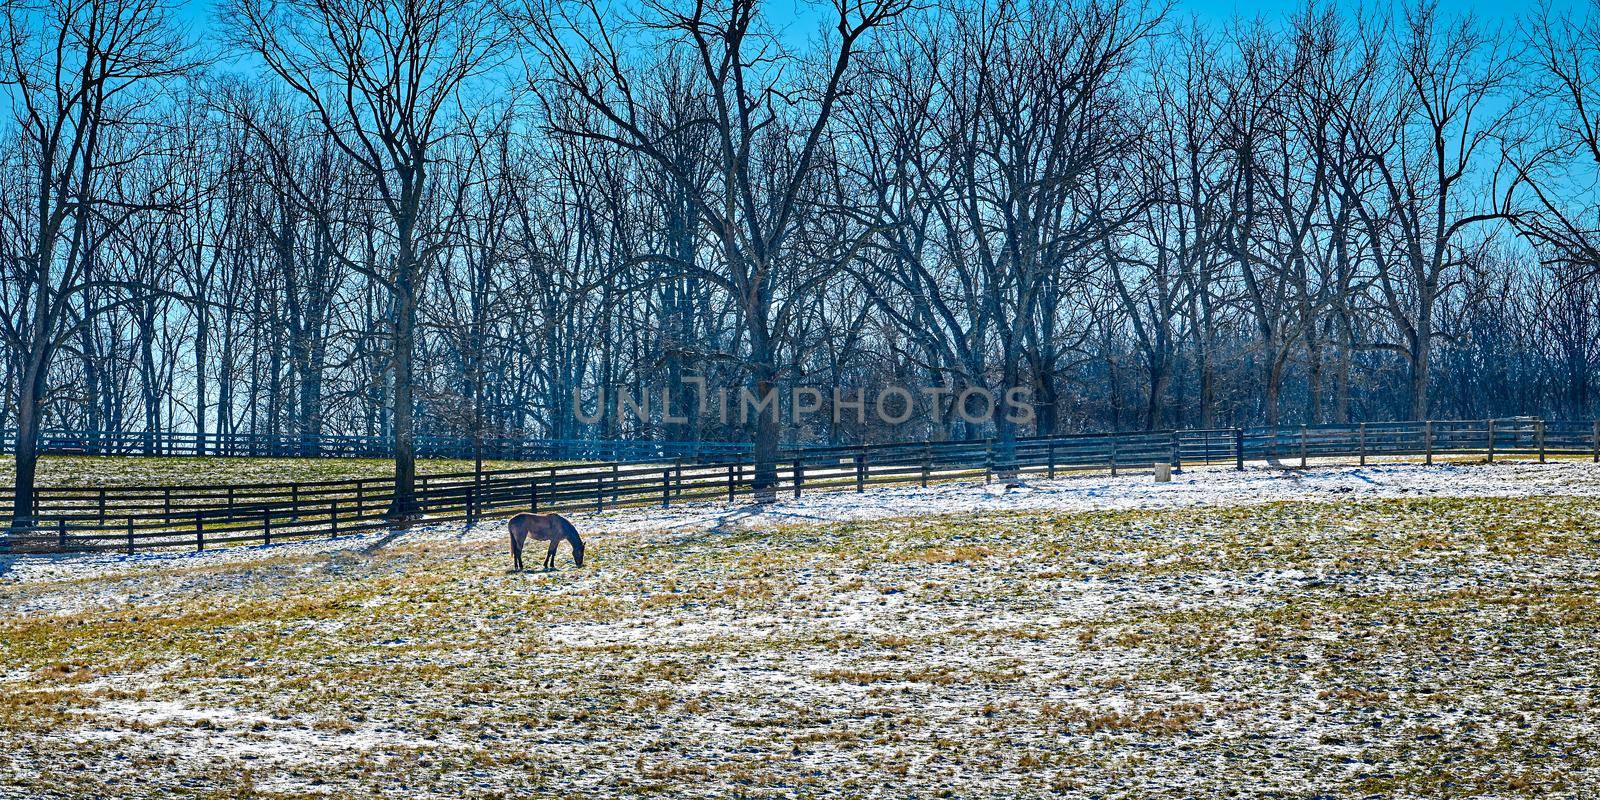 Thoroughbred horse gazing in a snow cover fiield with trees and clear blue sky. by patrickstock